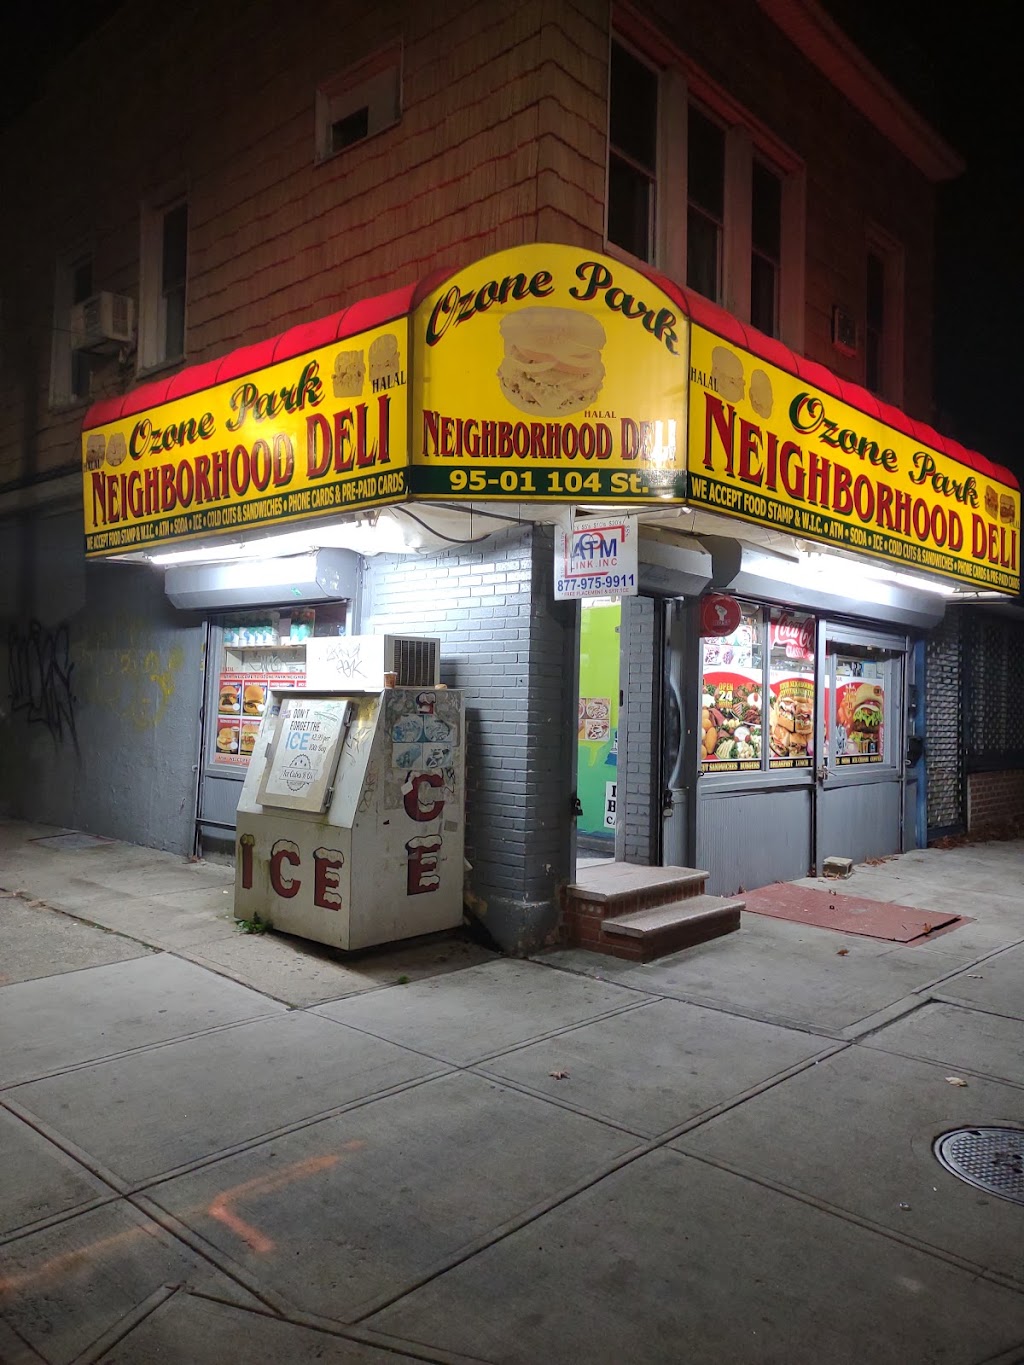 Ozone park deli & grocery | 95-01 104th St, Queens, NY 11416 | Phone: (347) 960-7404